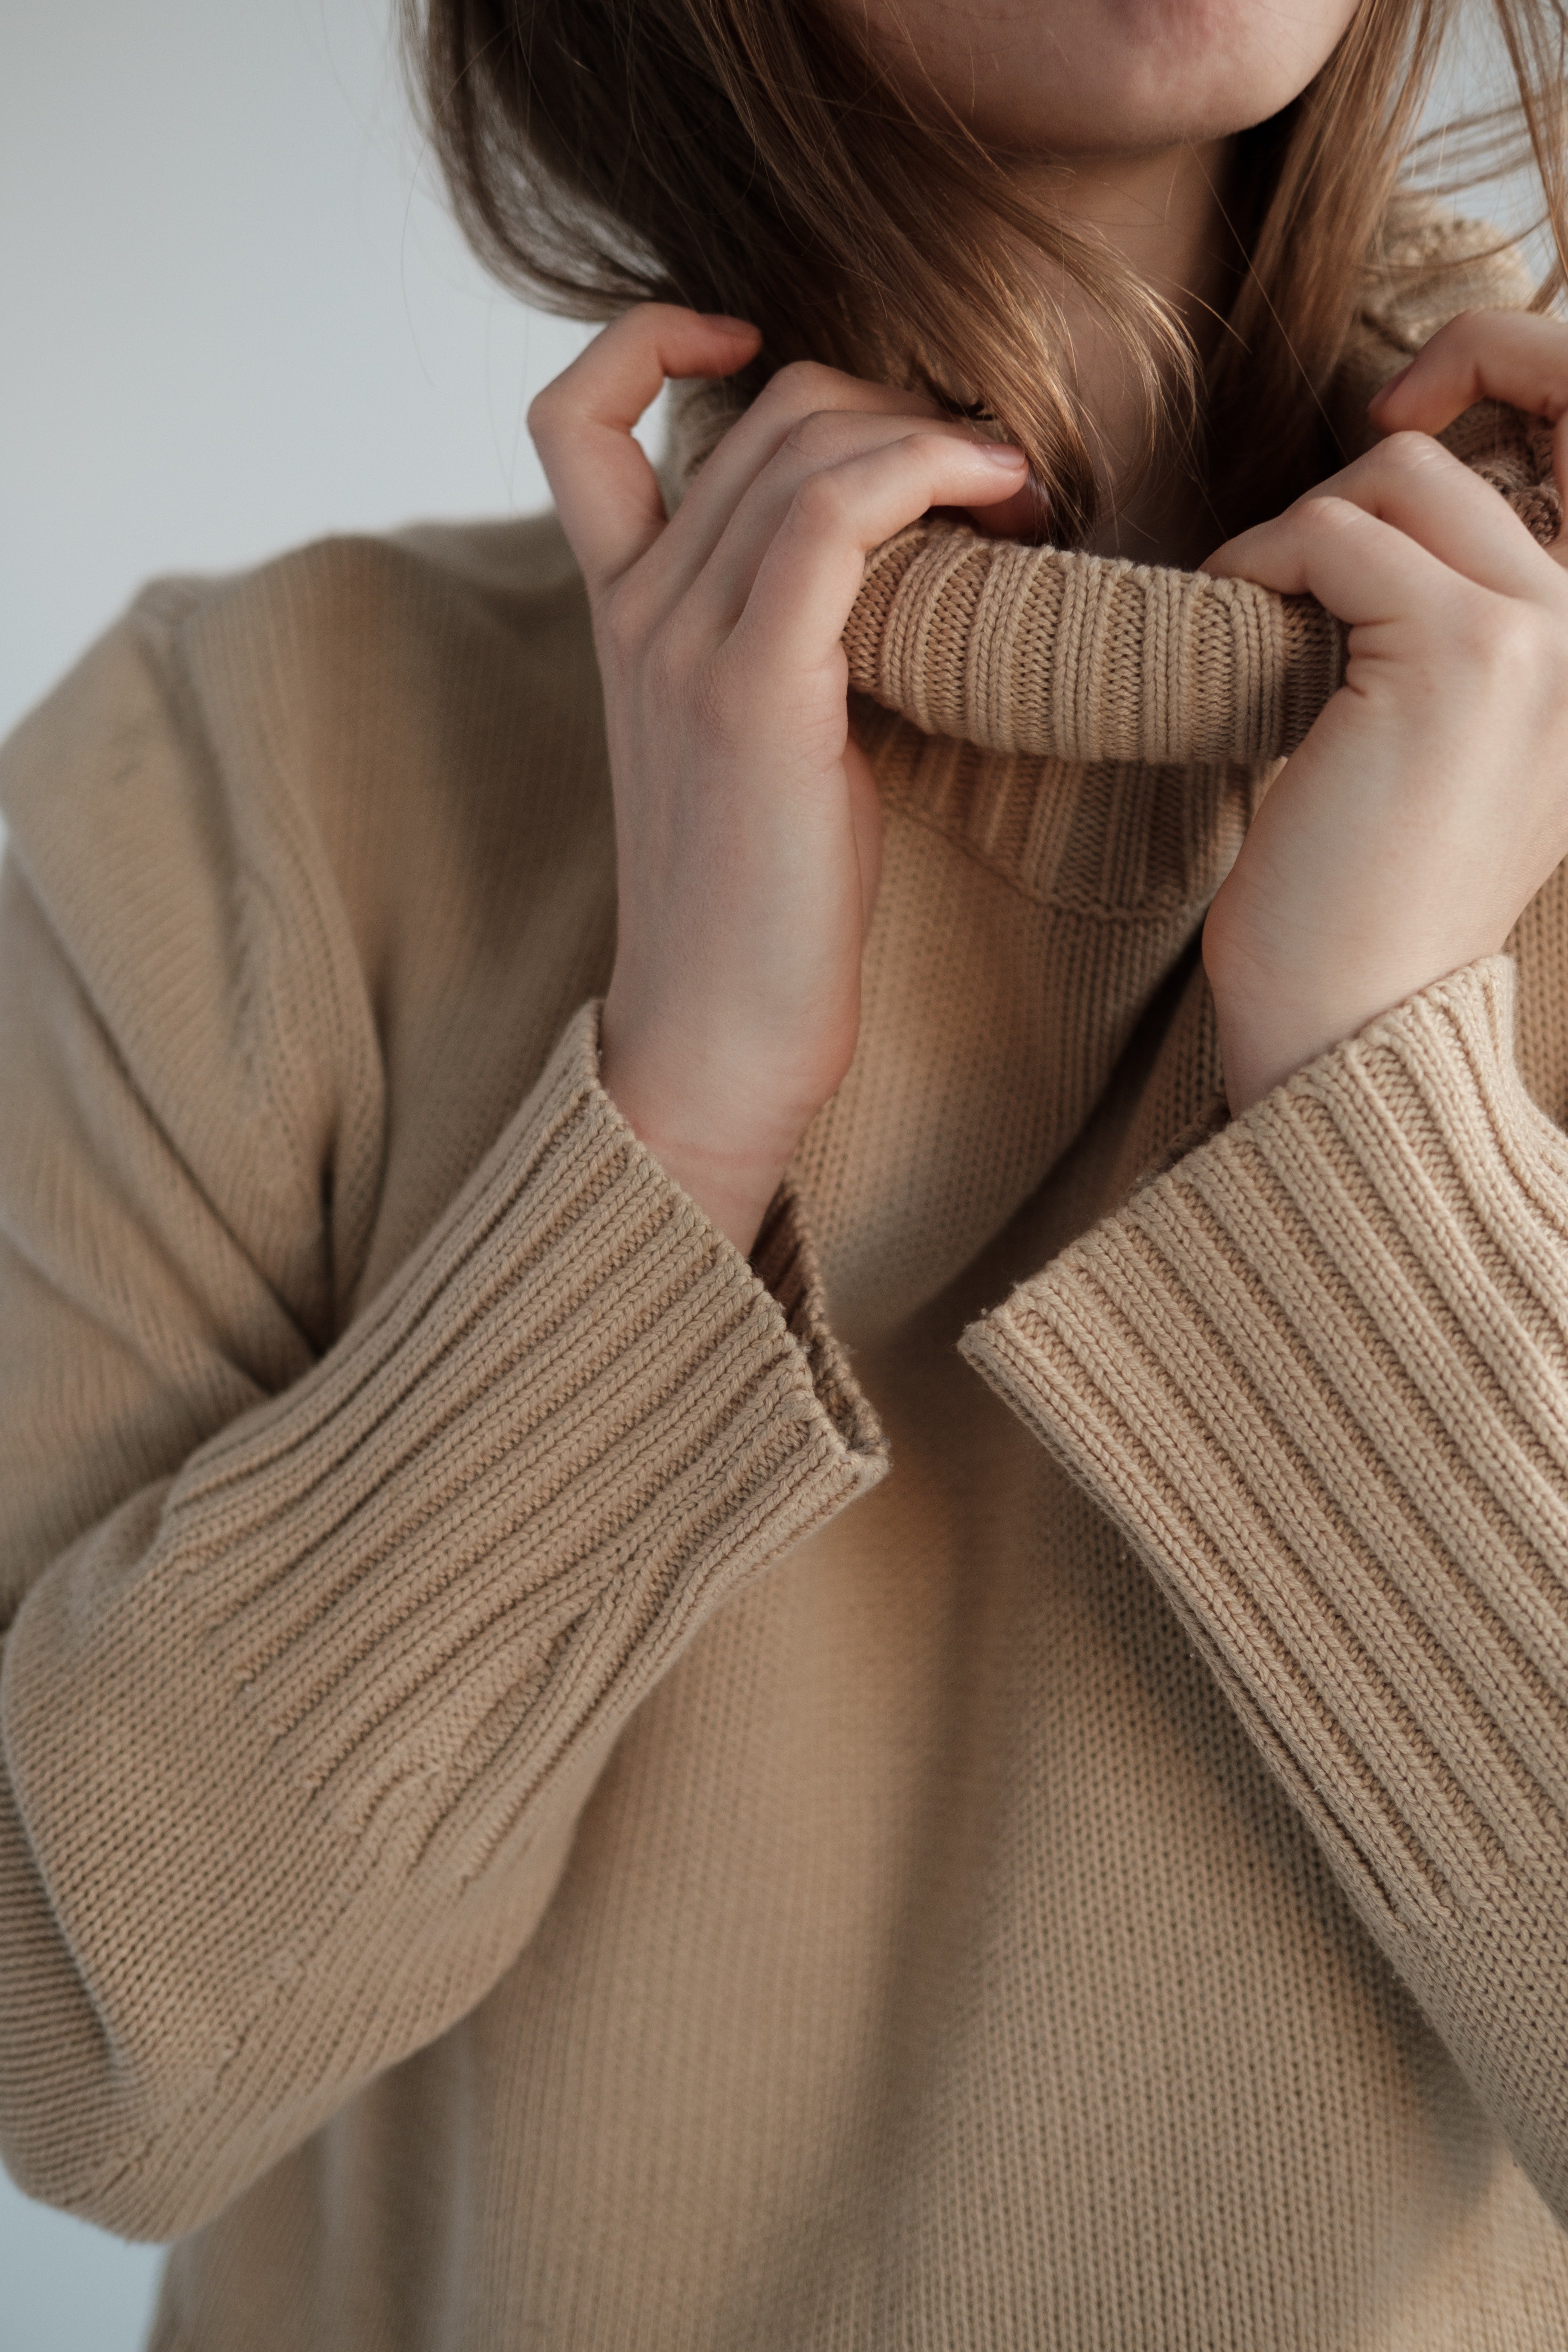 Lorraine hurriedly threw on a sweater before she marched to the front door. | Source: Pexels